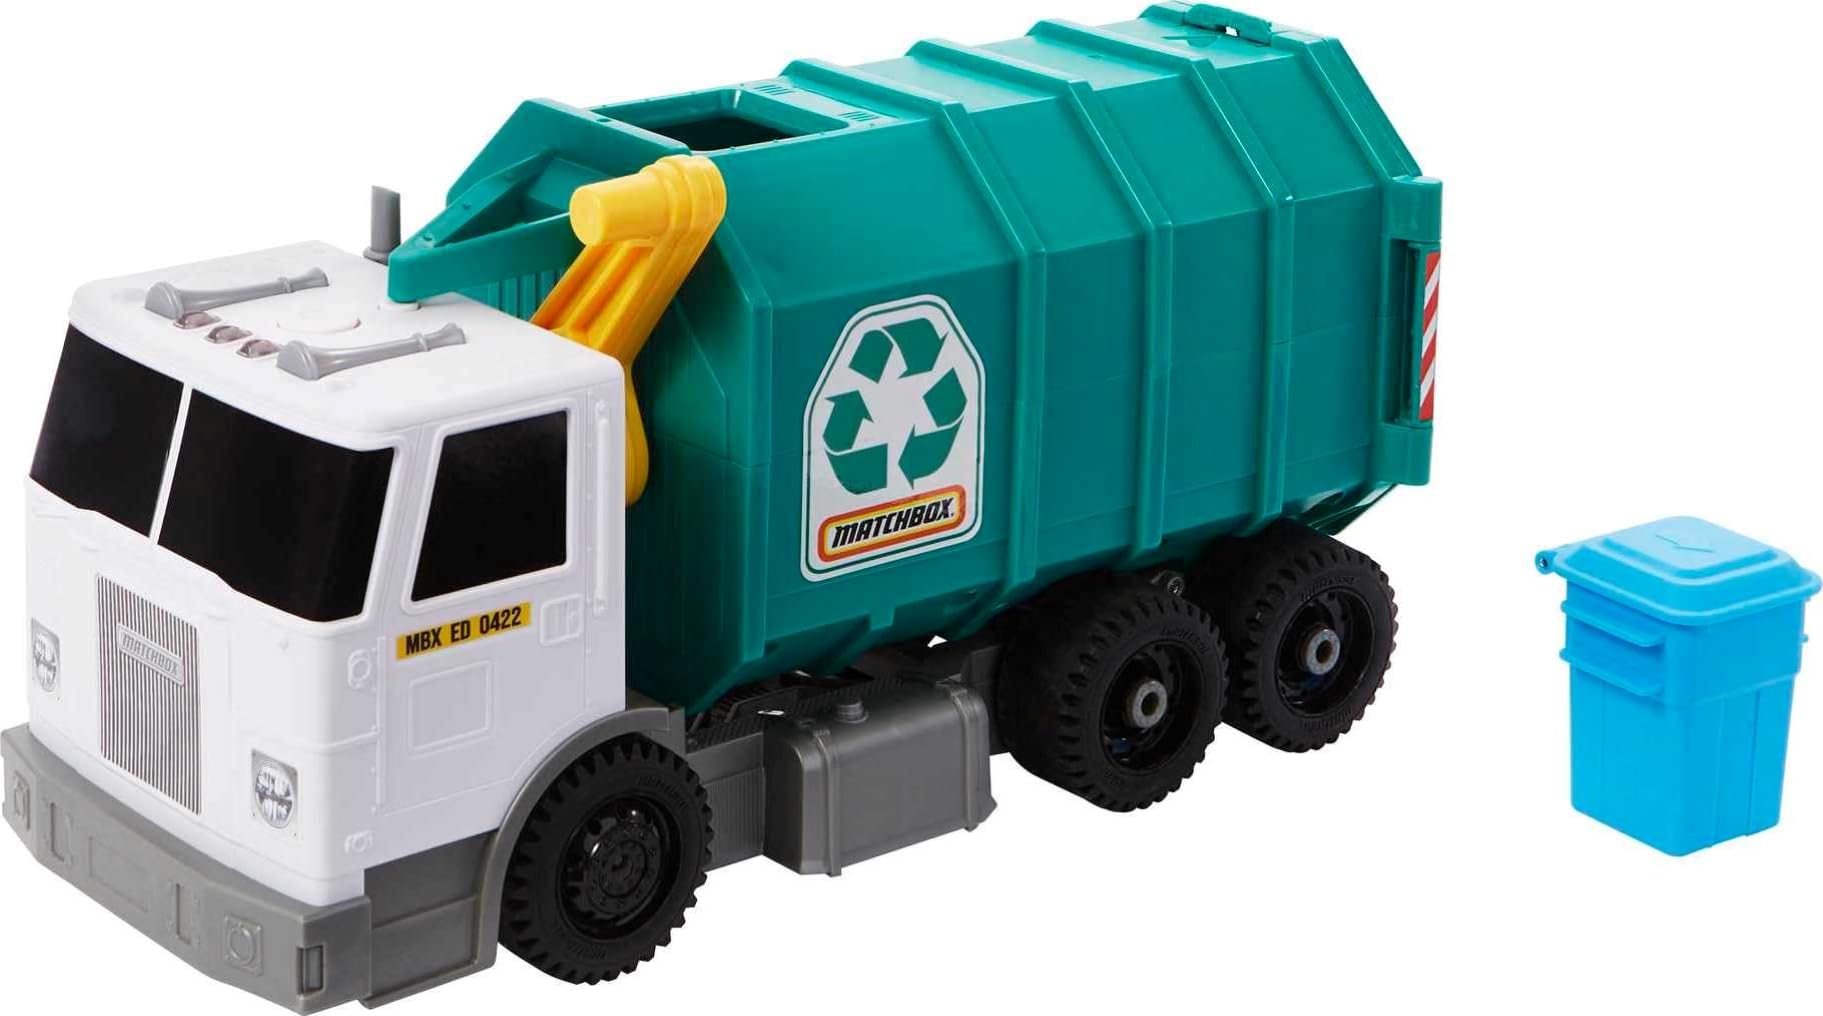 Matchbox Cars, 15-Inch Toy Recycling Garbage Truck with Lights and Sounds, Green Toy for Kids (Amazon Exclusive)